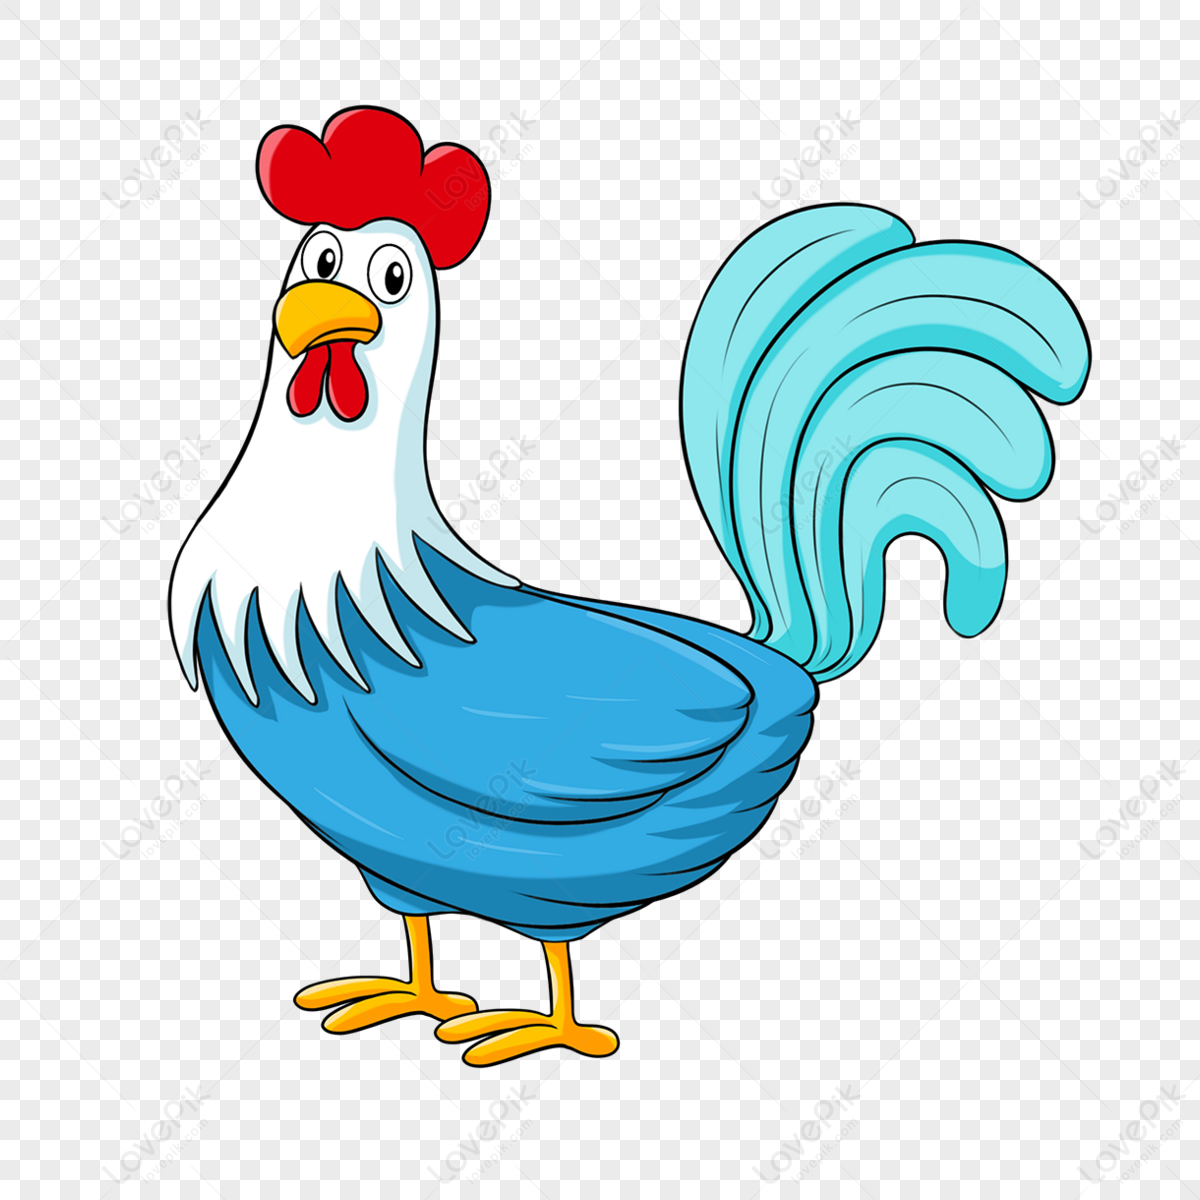 Blue Rooster Clip Art,chicken,cock,yellow PNG Picture And Clipart Image ...